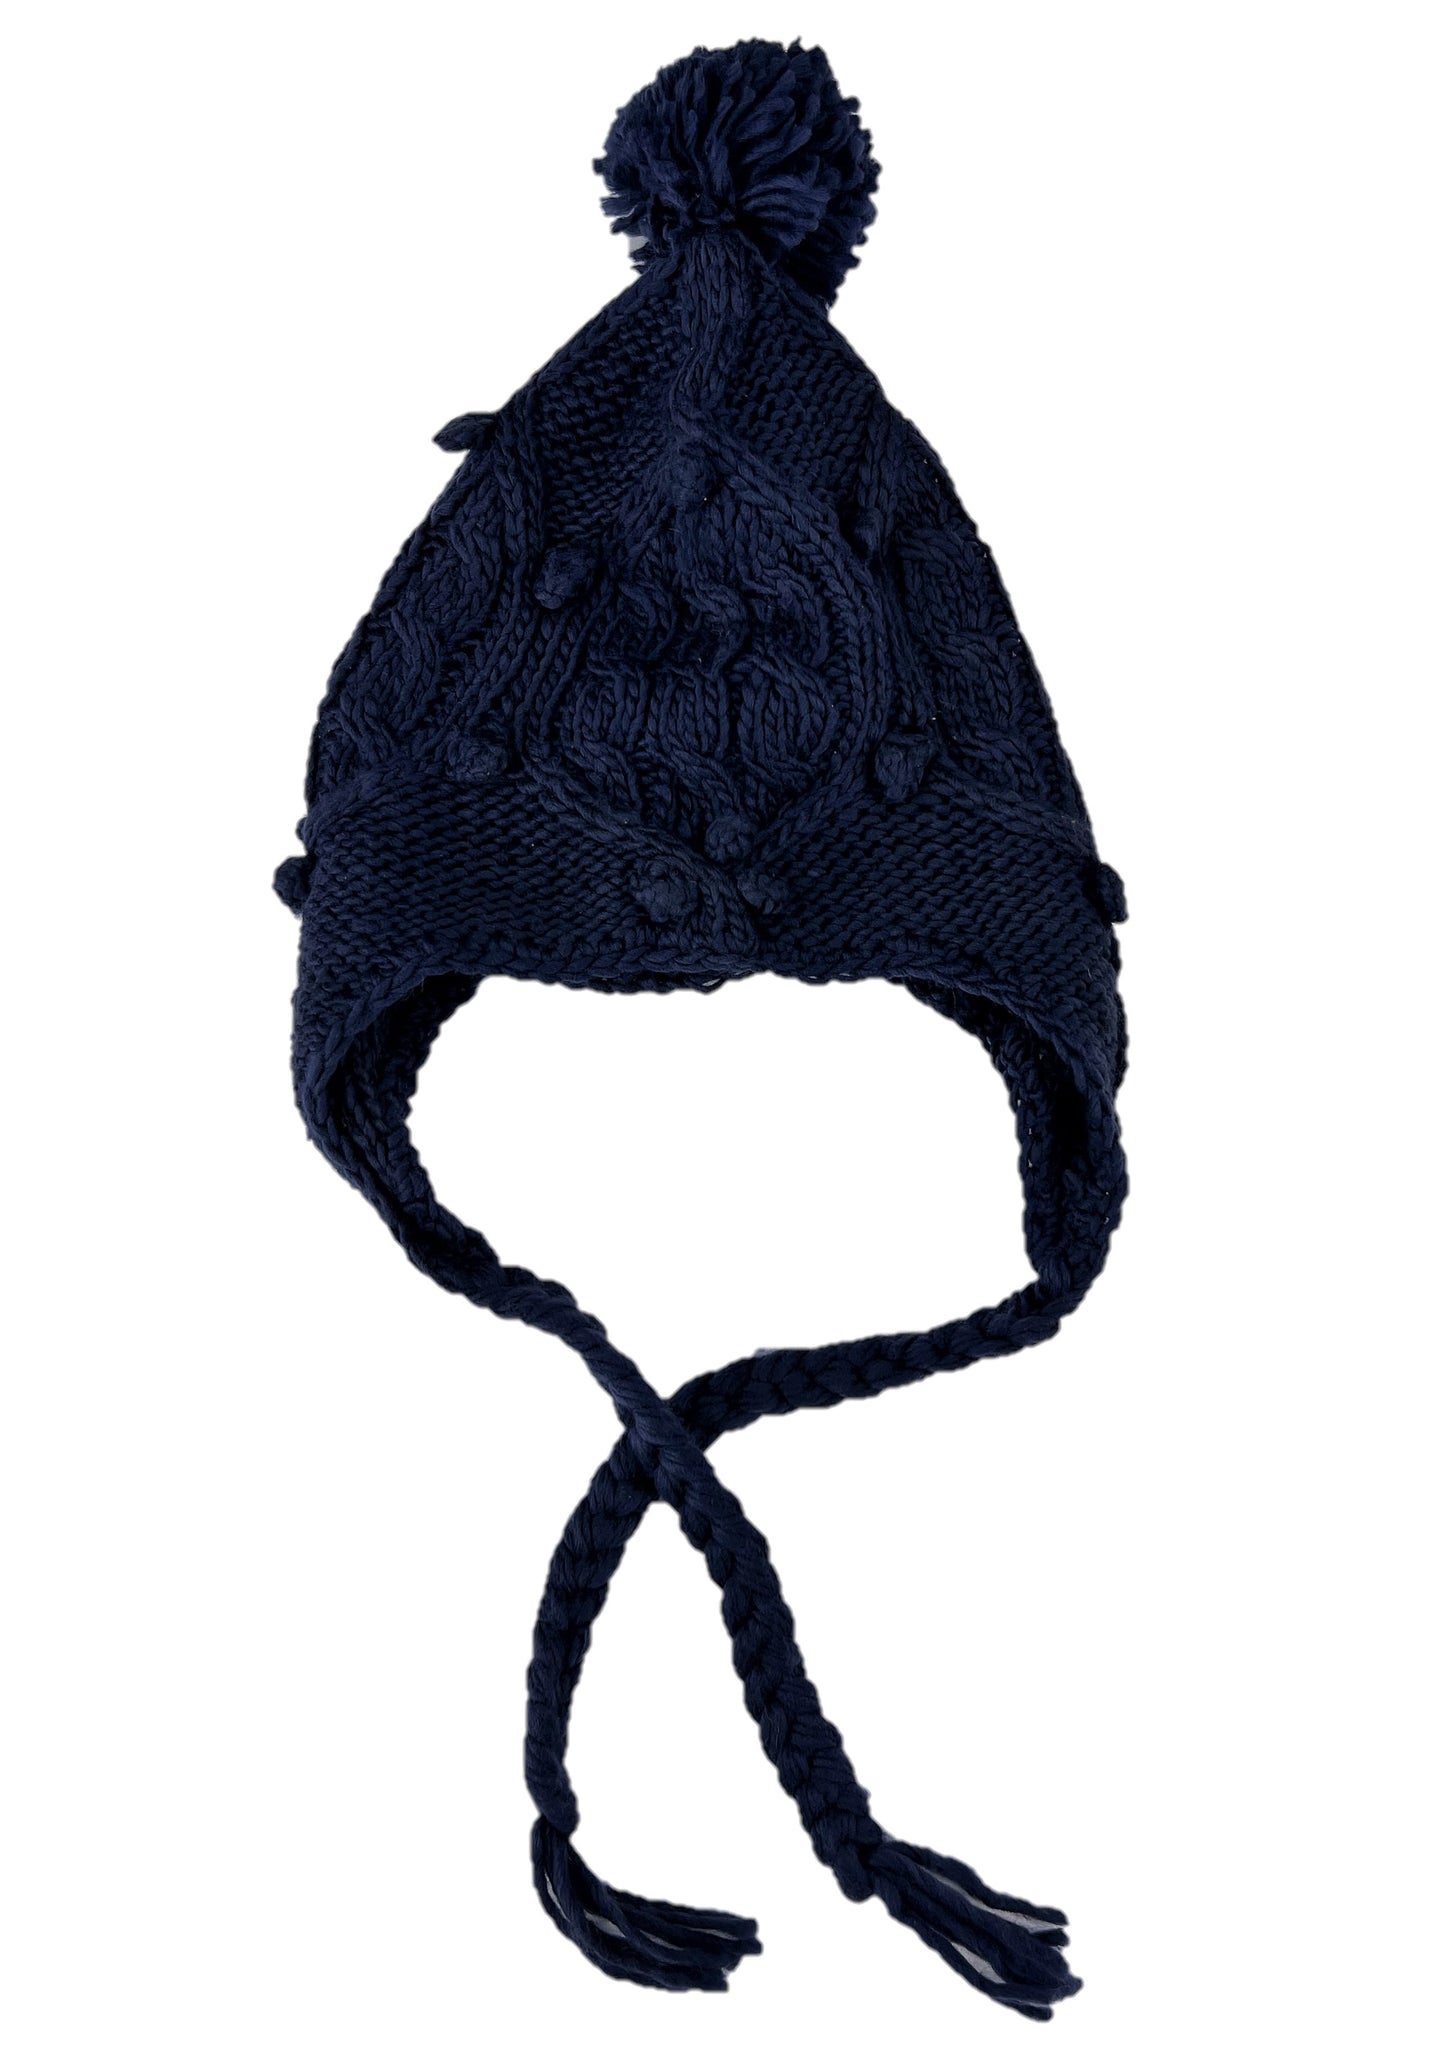 Ladies Peruvian Bobble Hat Knitted Winter Cold Weather Hat - 2 Colours to Choose